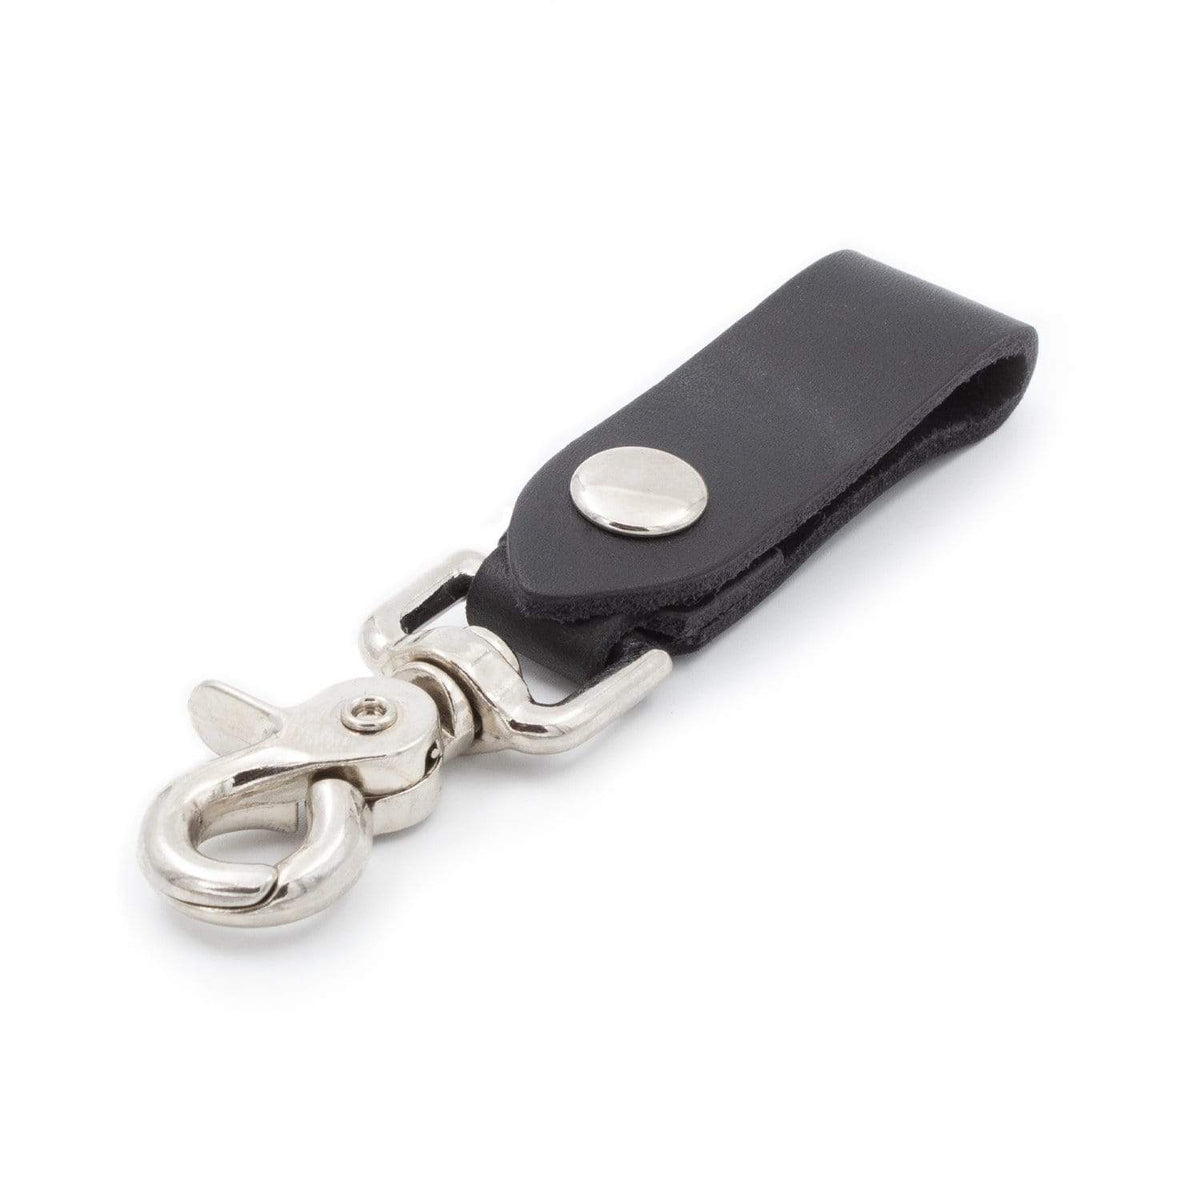 Main Street Forge Small Goods Midnight Black Full Grain Leather Keychain | Made in USA | Easy Open Hook for Key &amp; Accessories 816895023631